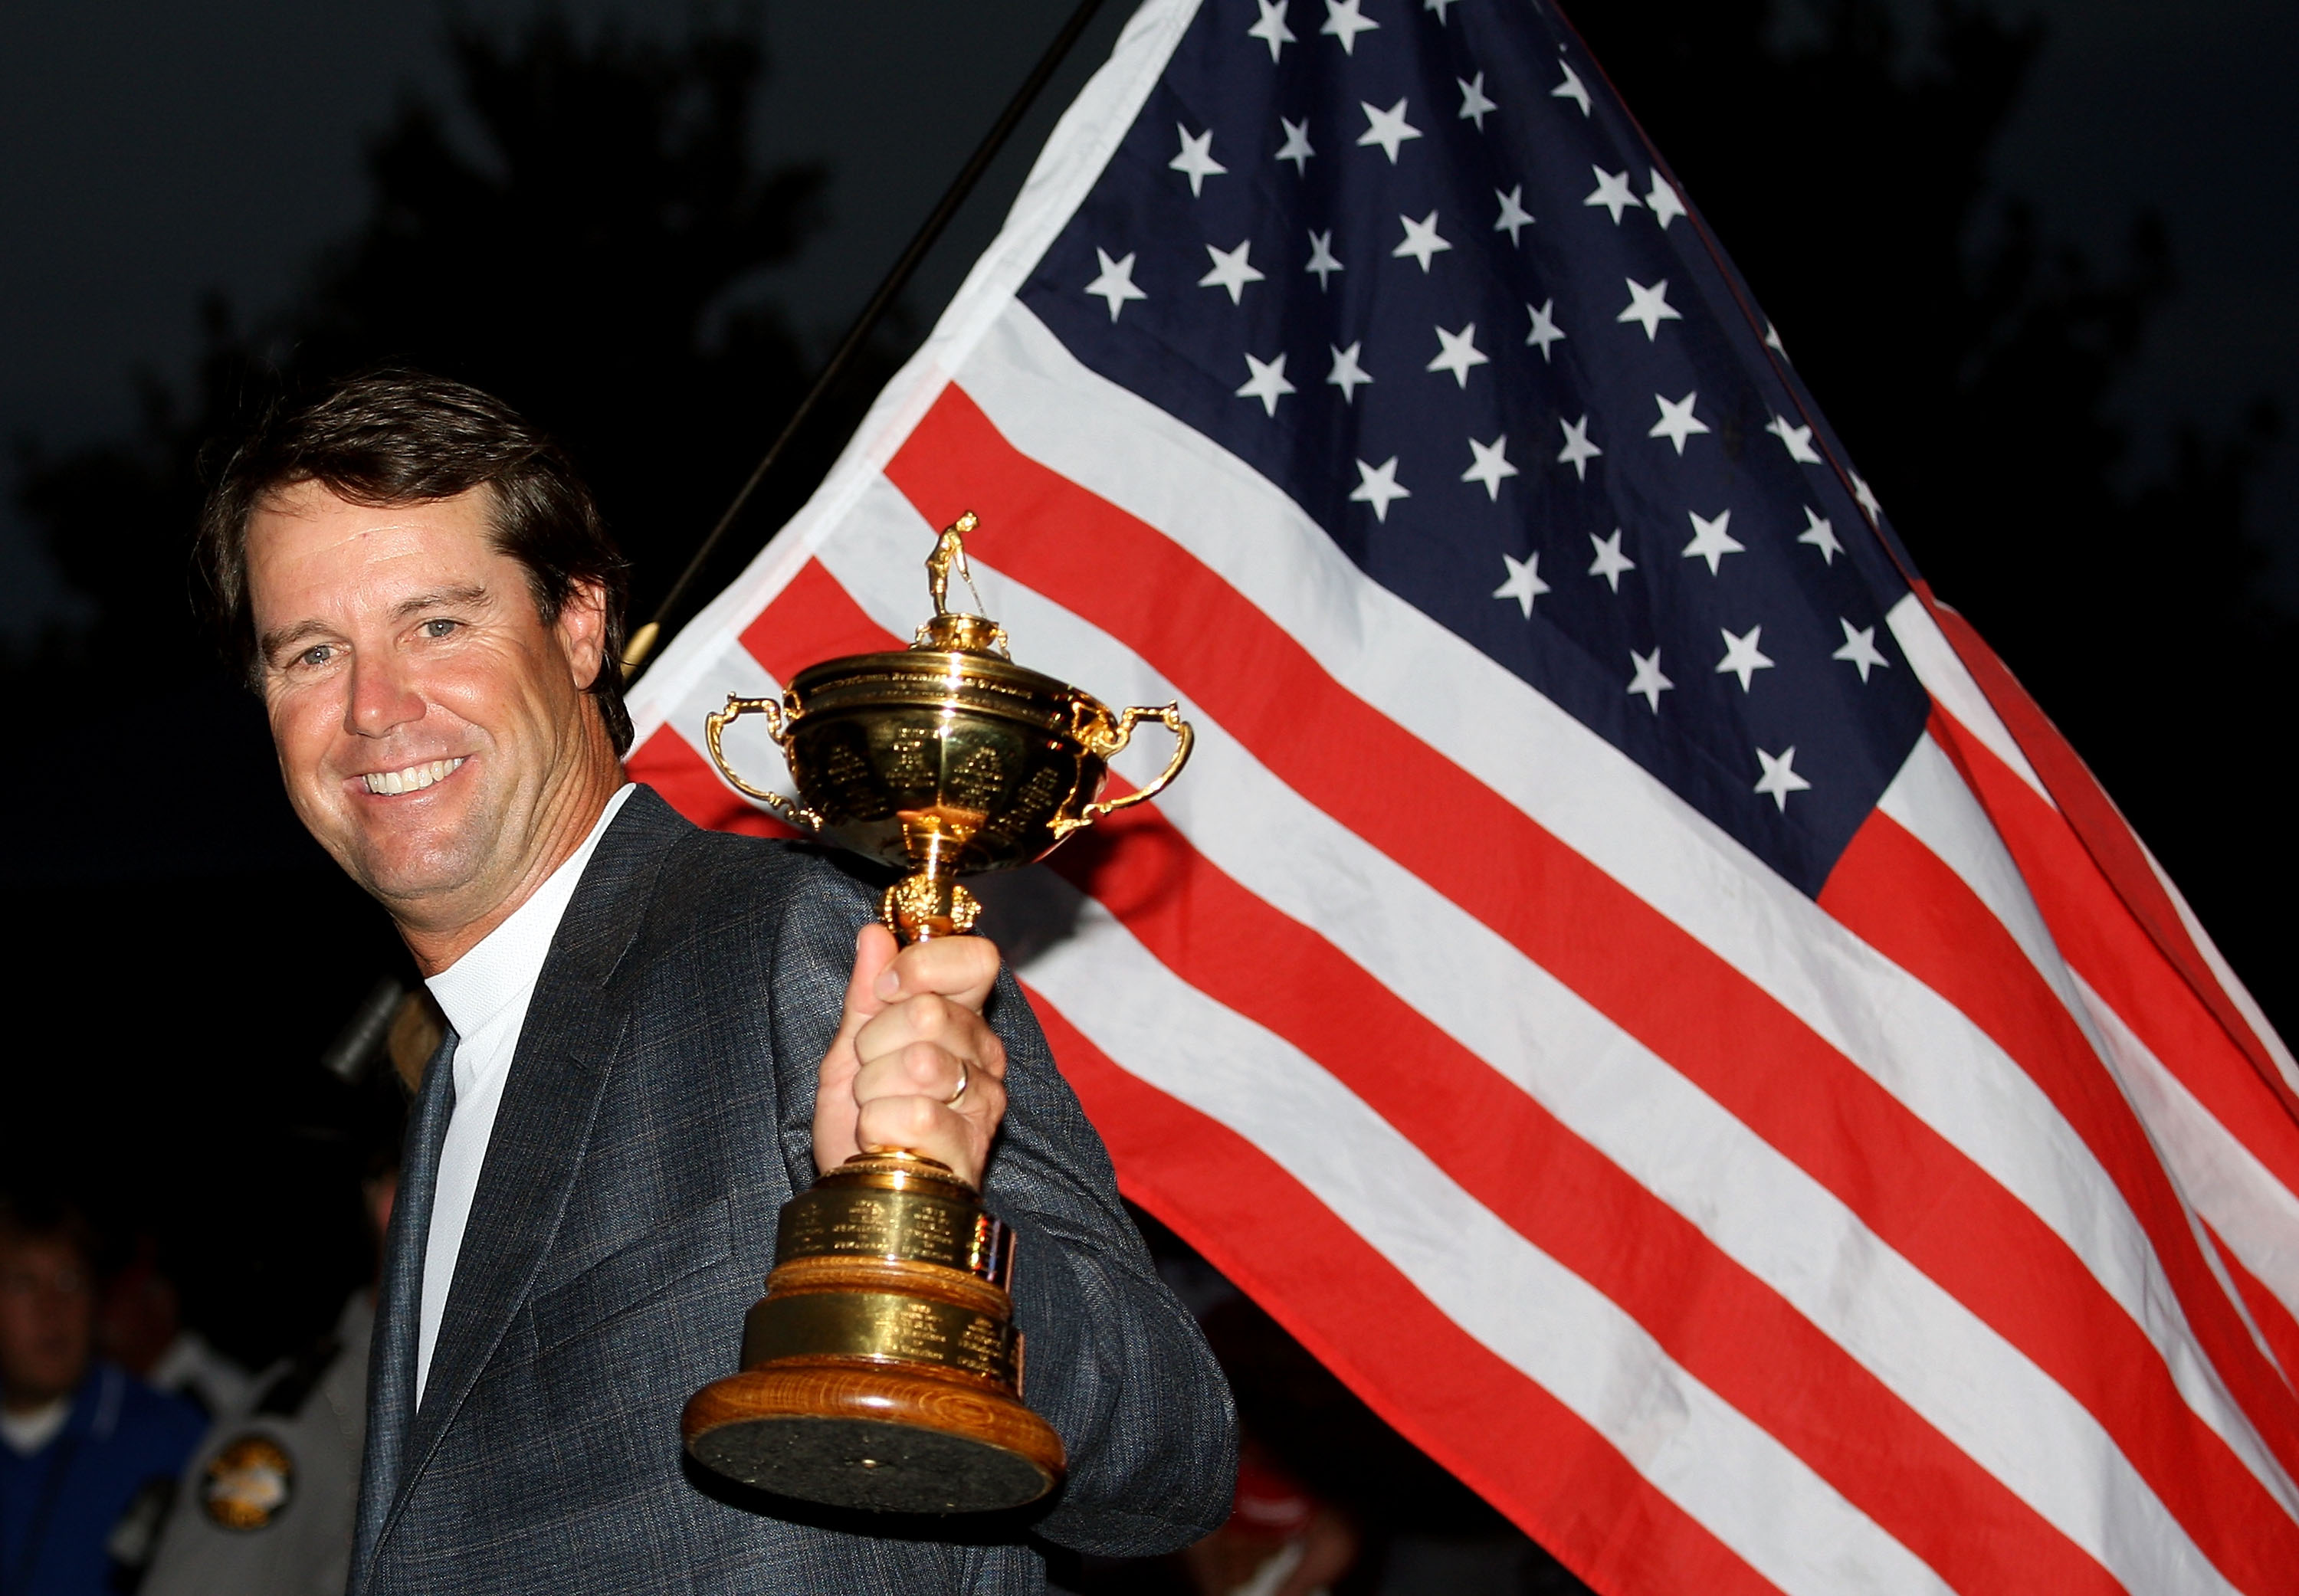 Paul Azinger after winning the 2008 Ryder Cup (Photo: Getty Images)